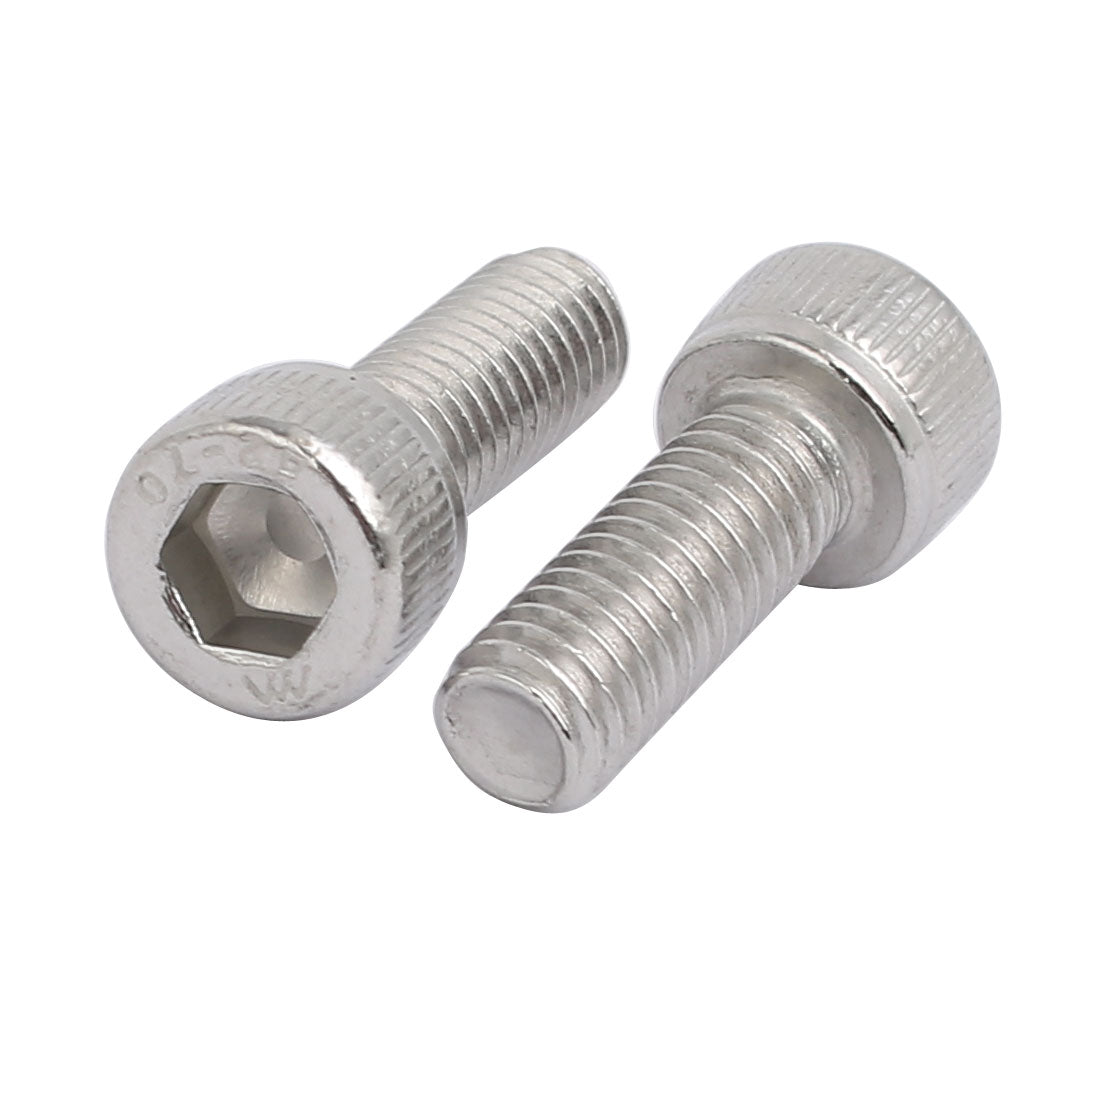 uxcell Uxcell M6x16mm 304 Stainless Steel Left Hand Thread Hex Socket Cap Screw Fastener 2pcs